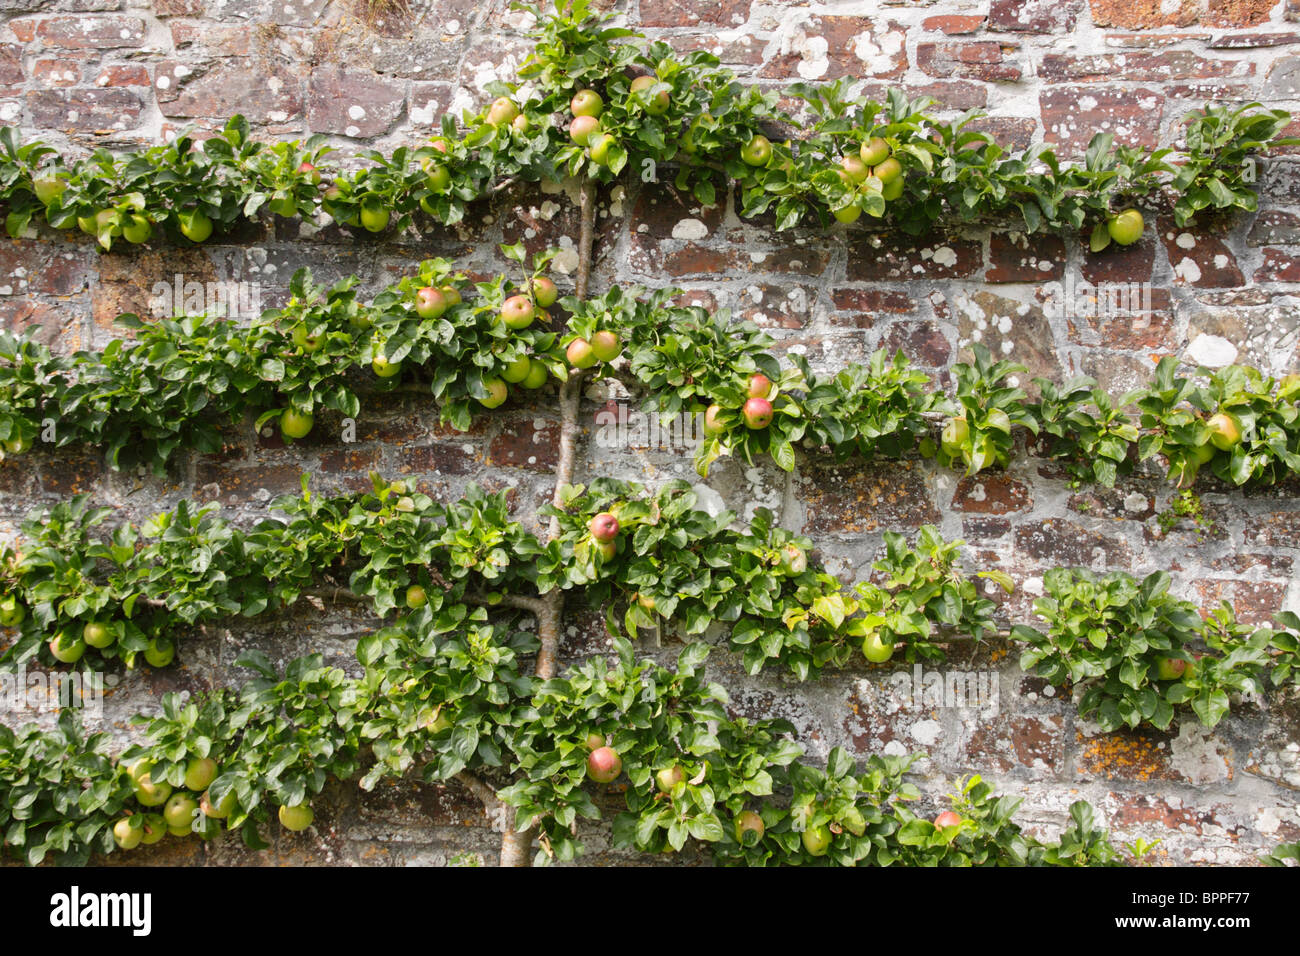 Apple tree trained to grow as an espalier tree against a garden wall. Stock Photo